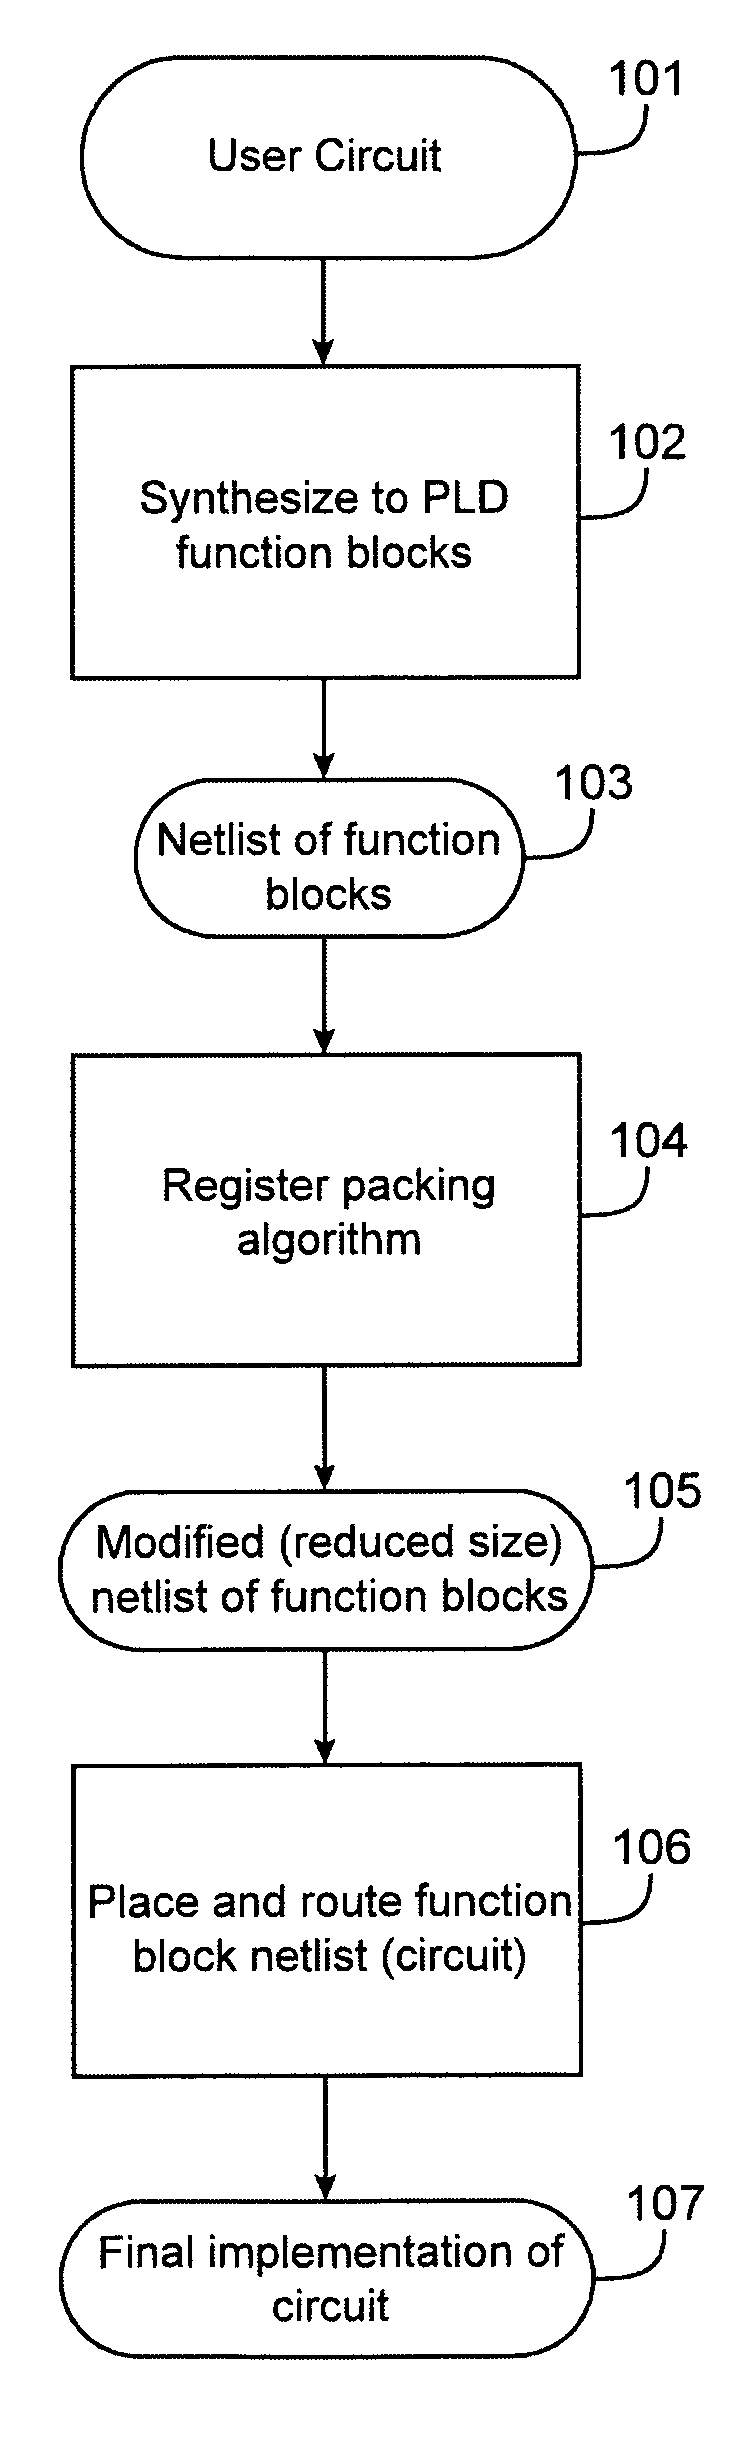 Techniques for identifying functional blocks in a design that match a template and combining the functional blocks into fewer programmable circuit elements